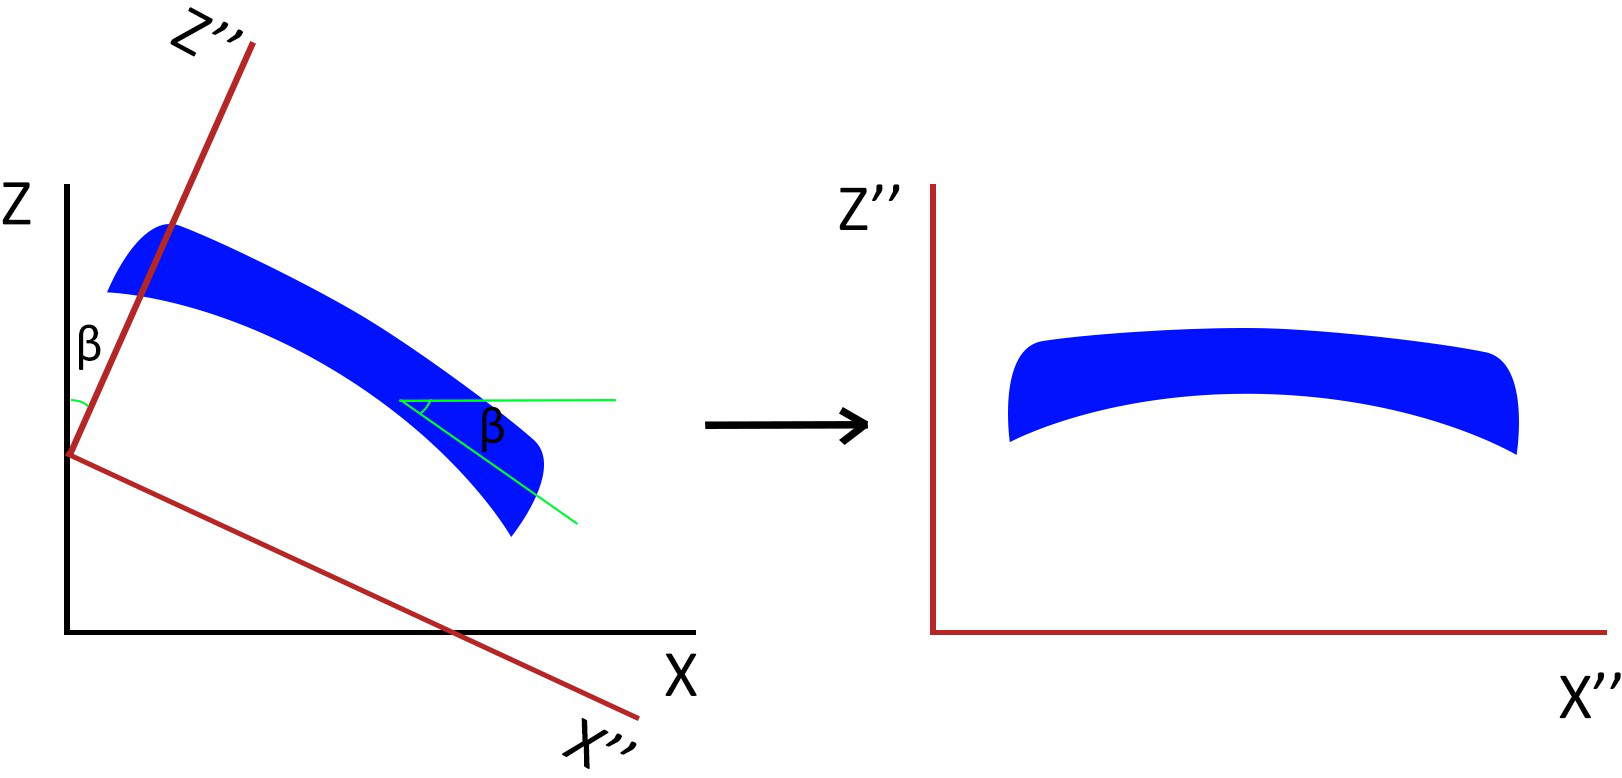 A dipping stratigraphic formation. Left: X and Z axes are rotated to reverse the dip of the formation. Right: result of rotation